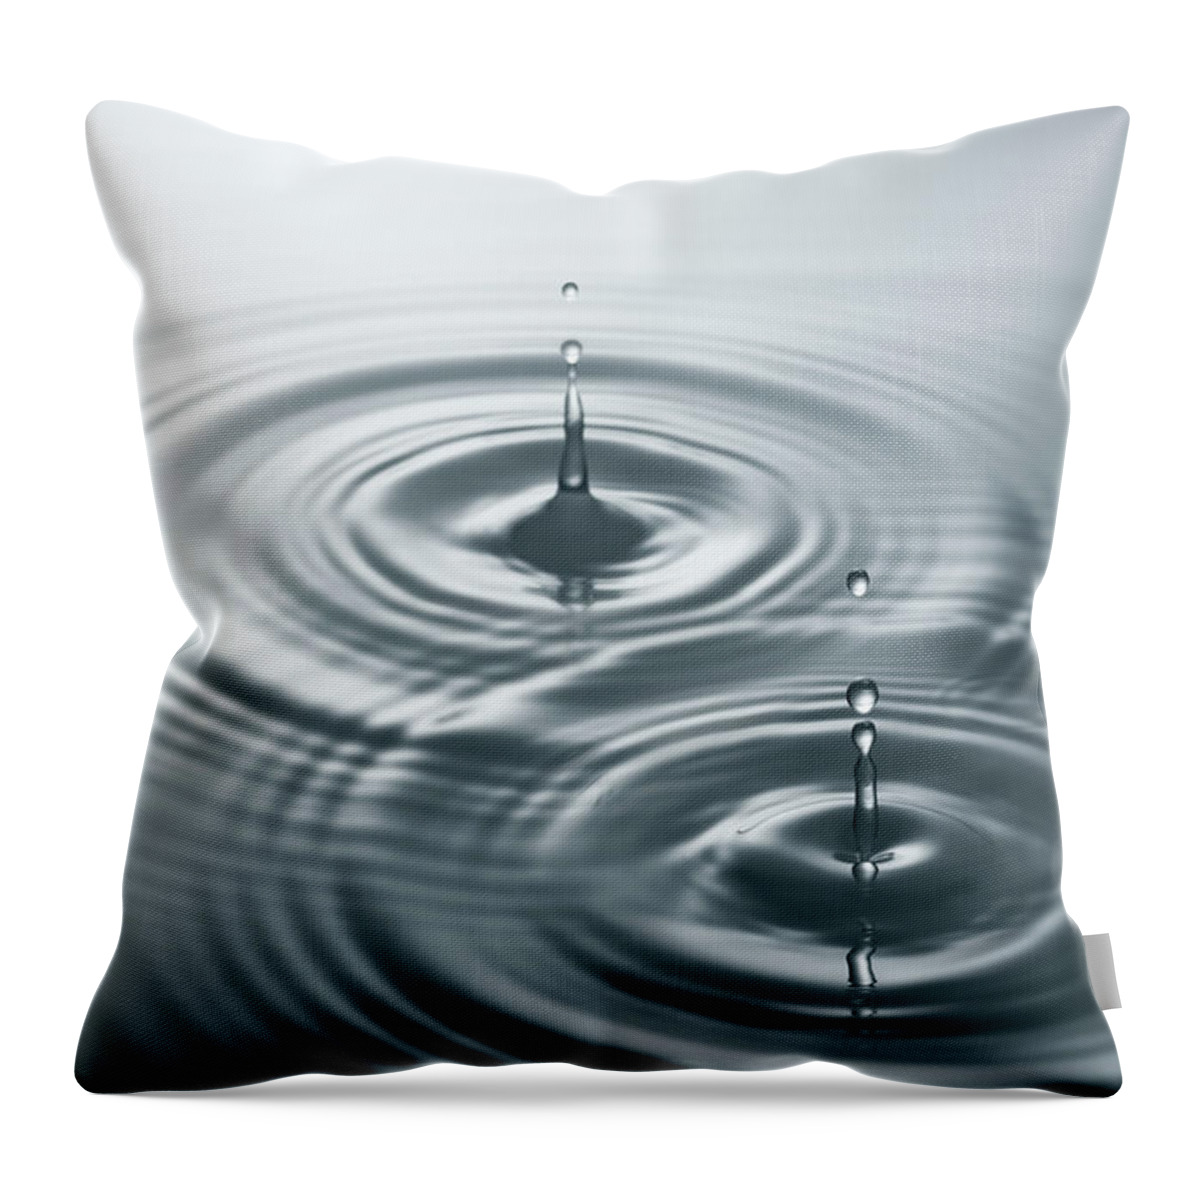 Tranquility Throw Pillow featuring the photograph Two Long Droplets In Dark Water by Anthony Bradshaw